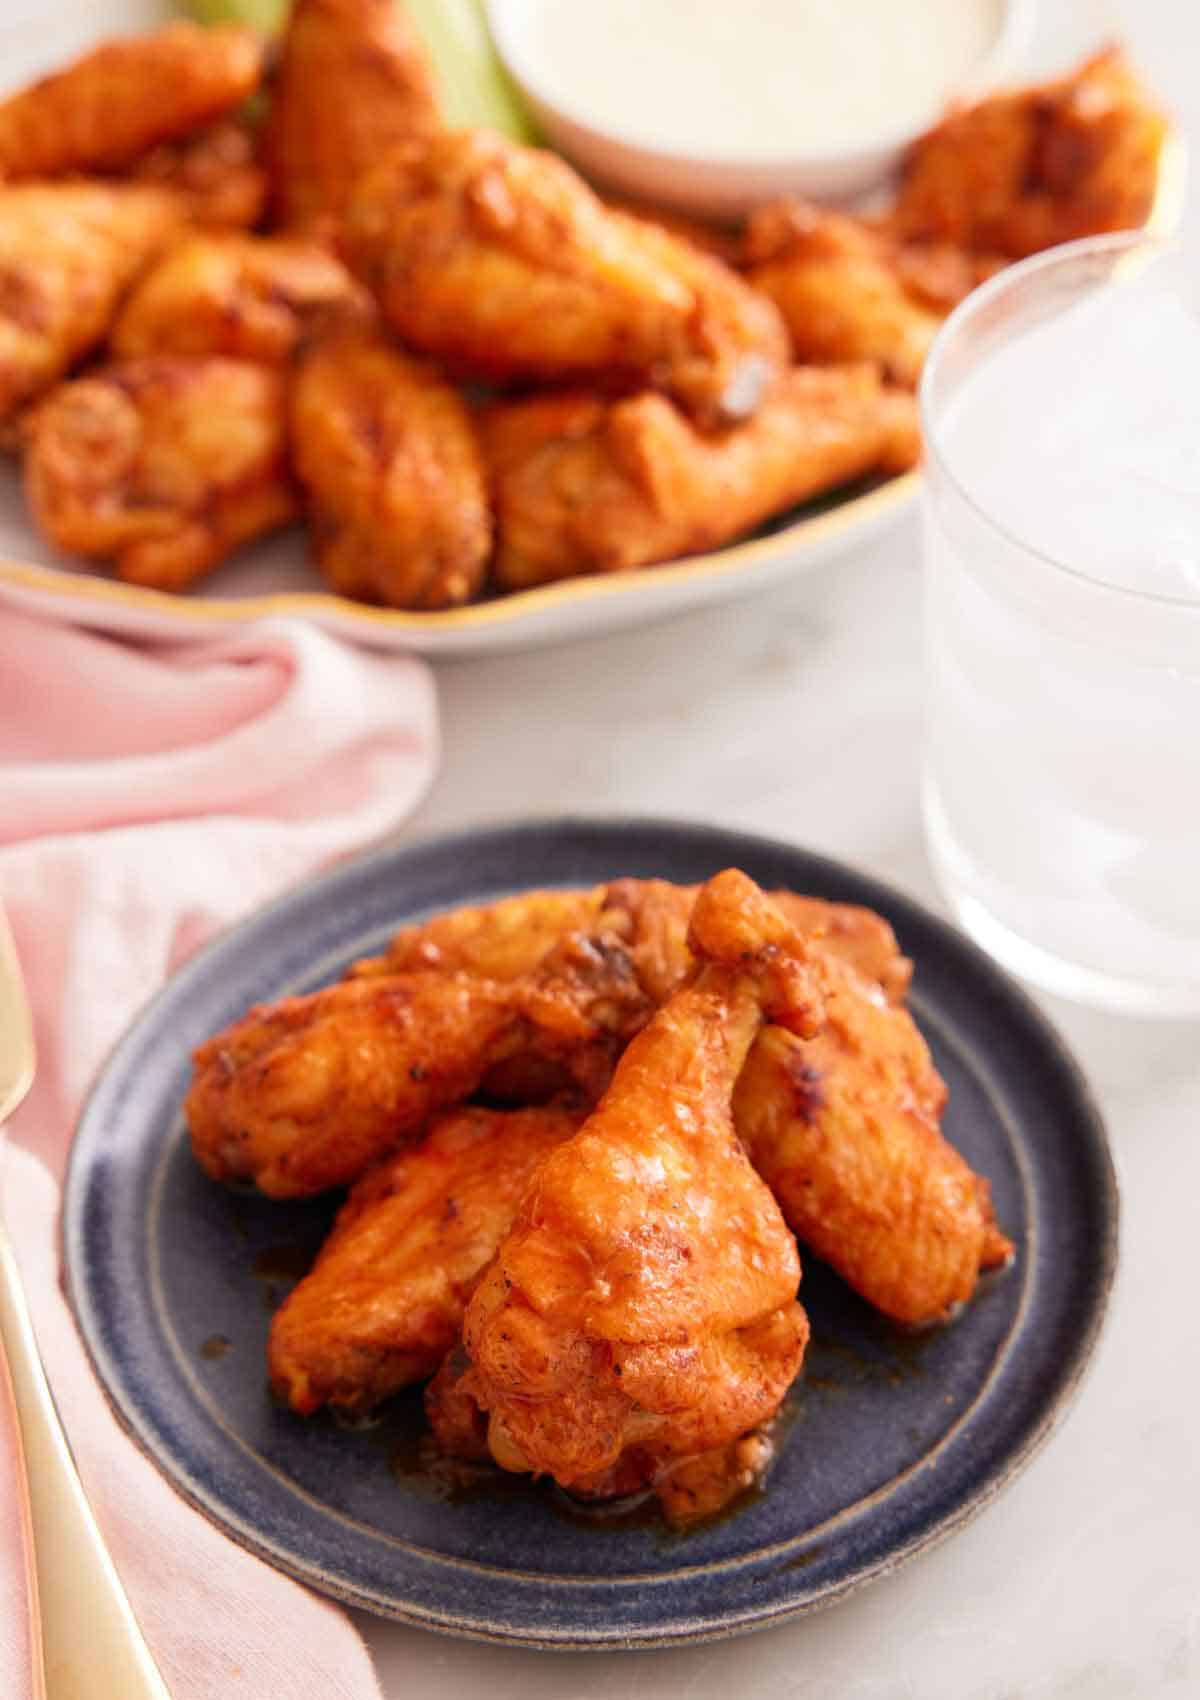 A plate with multiple air fryer chicken wings with a platter of more in the background with a glass of ice water.